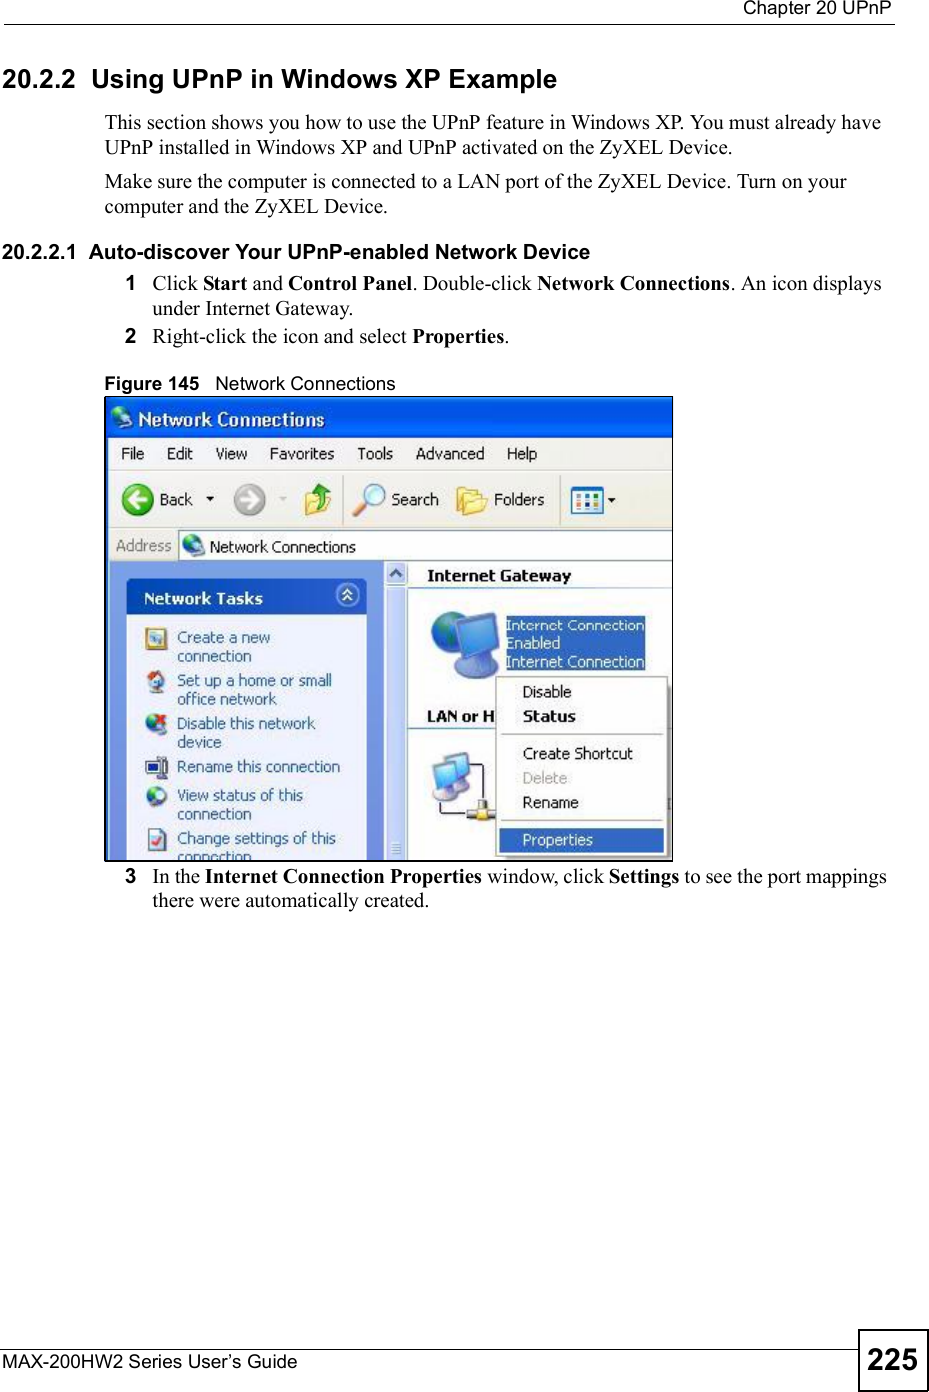  Chapter 20UPnPMAX-200HW2 Series User s Guide 22520.2.2  Using UPnP in Windows XP ExampleThis section shows you how to use the UPnP feature in Windows XP. You must already have UPnP installed in Windows XP and UPnP activated on the ZyXEL Device.Make sure the computer is connected to a LAN port of the ZyXEL Device. Turn on your computer and the ZyXEL Device. 20.2.2.1  Auto-discover Your UPnP-enabled Network Device1Click Start and Control Panel. Double-click Network Connections. An icon displays under Internet Gateway.2Right-click the icon and select Properties.Figure 145   Network Connections3In the Internet Connection Properties window, click Settings to see the port mappings there were automatically created. 